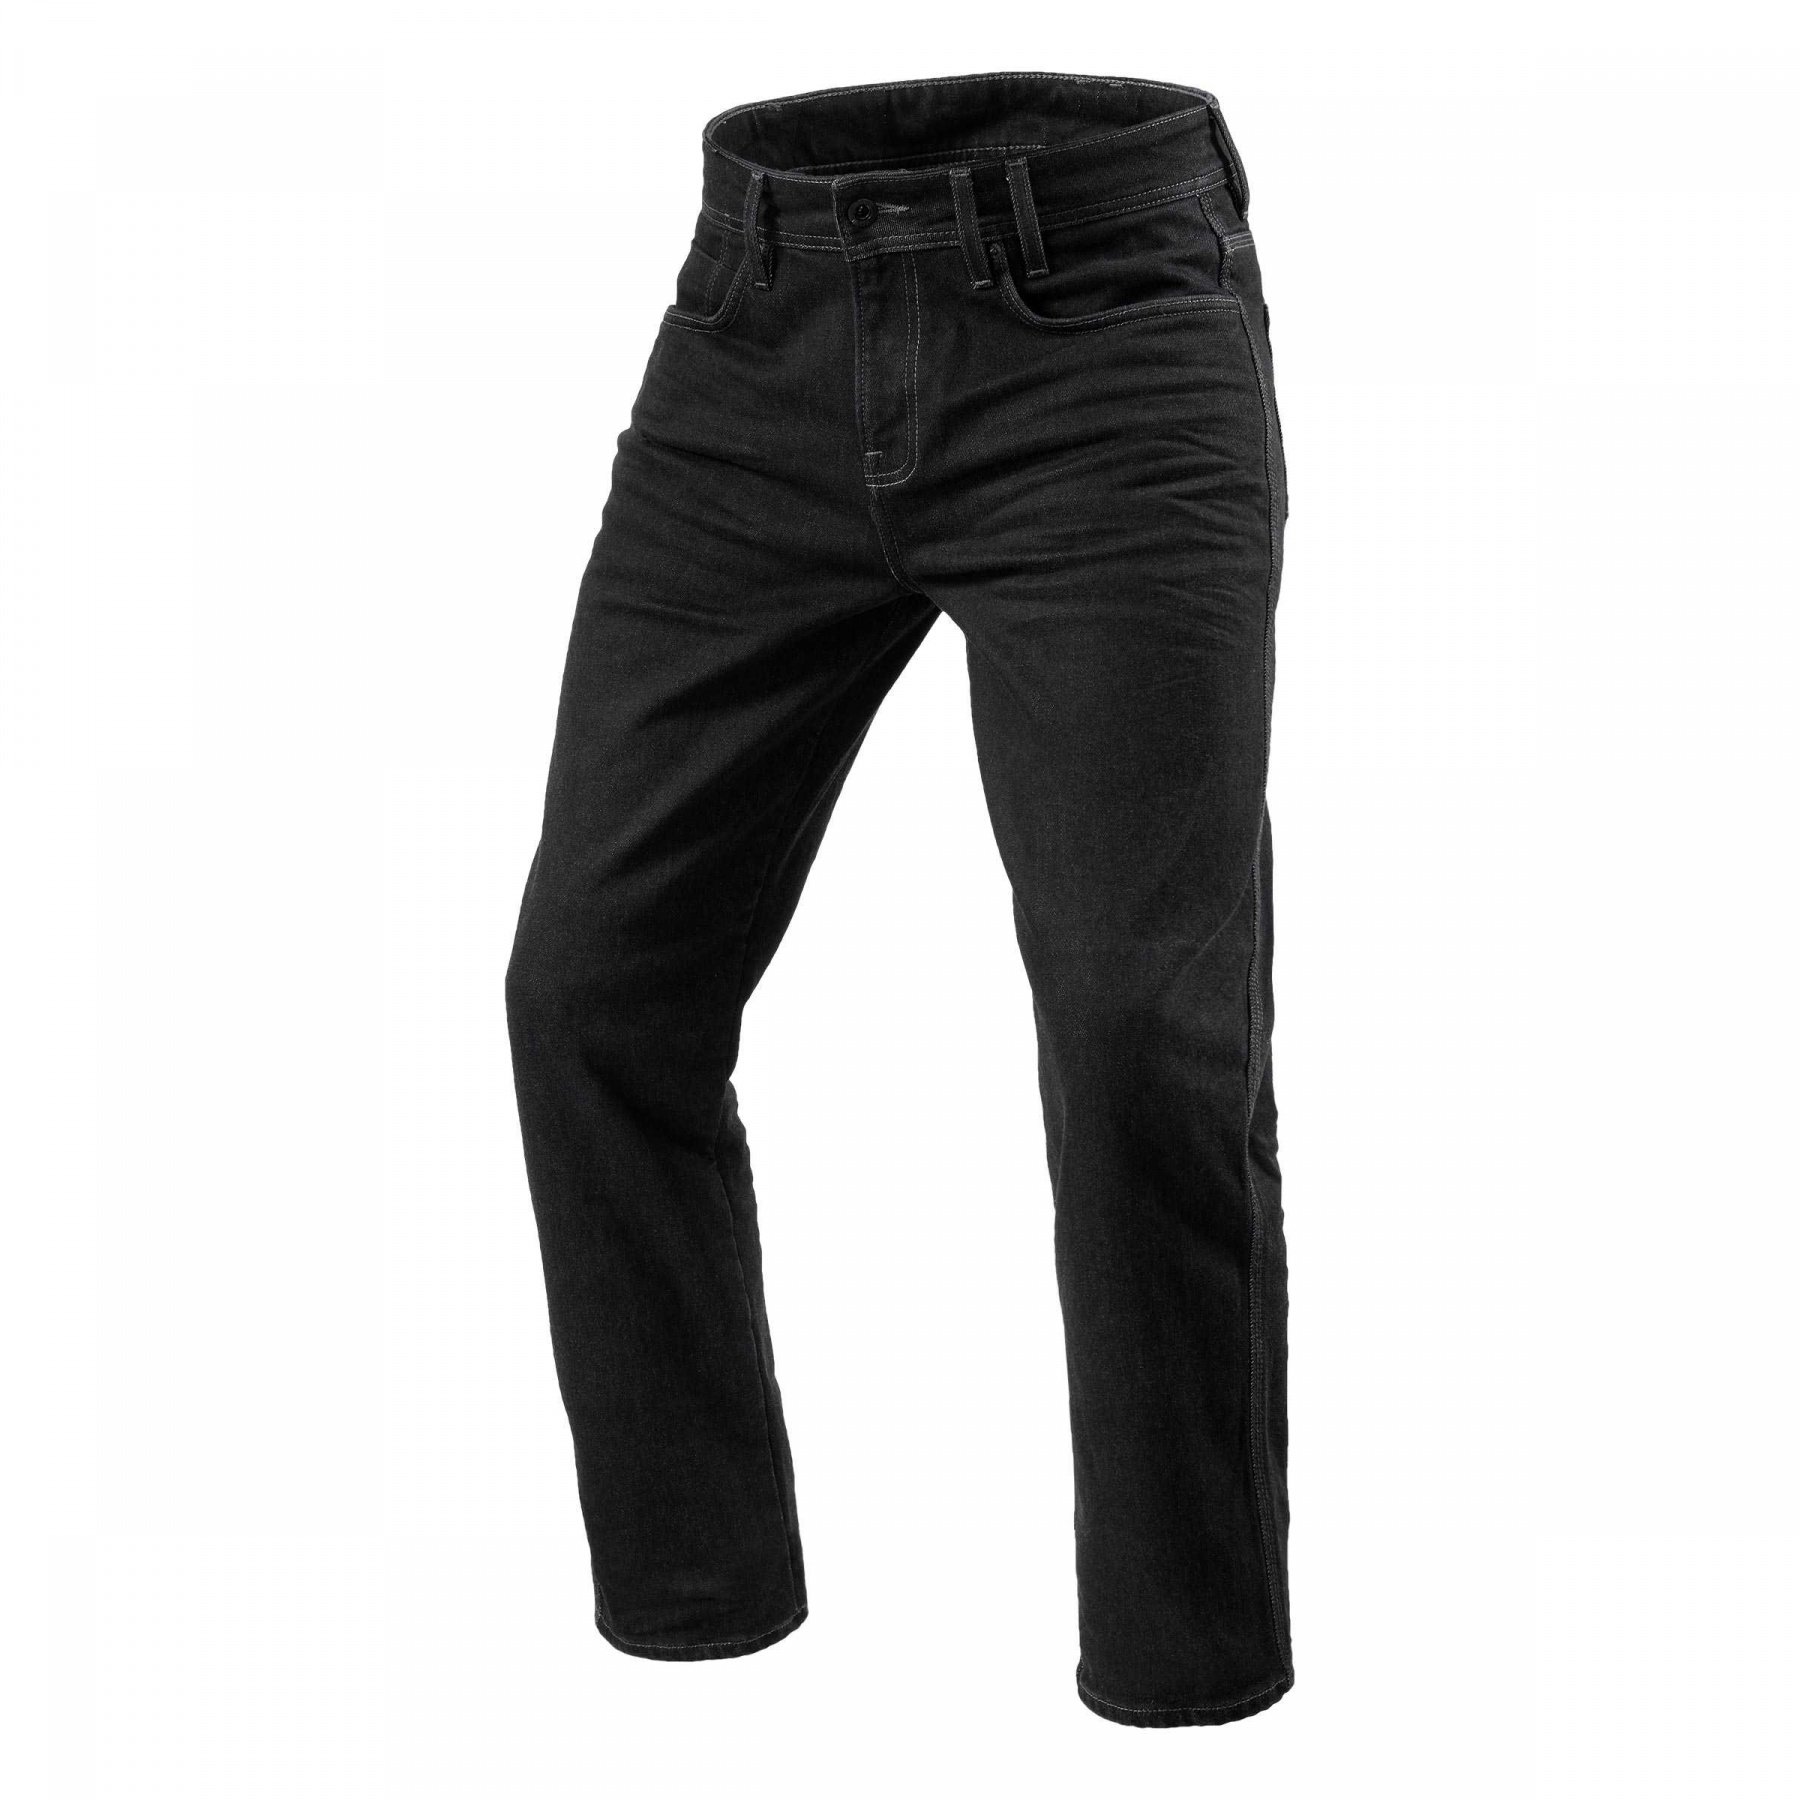 Image of REV'IT! Jeans Lombard 3 RF Dark Blue Used Motorcycle Jeans Size L34/W30 ID 8700001338233